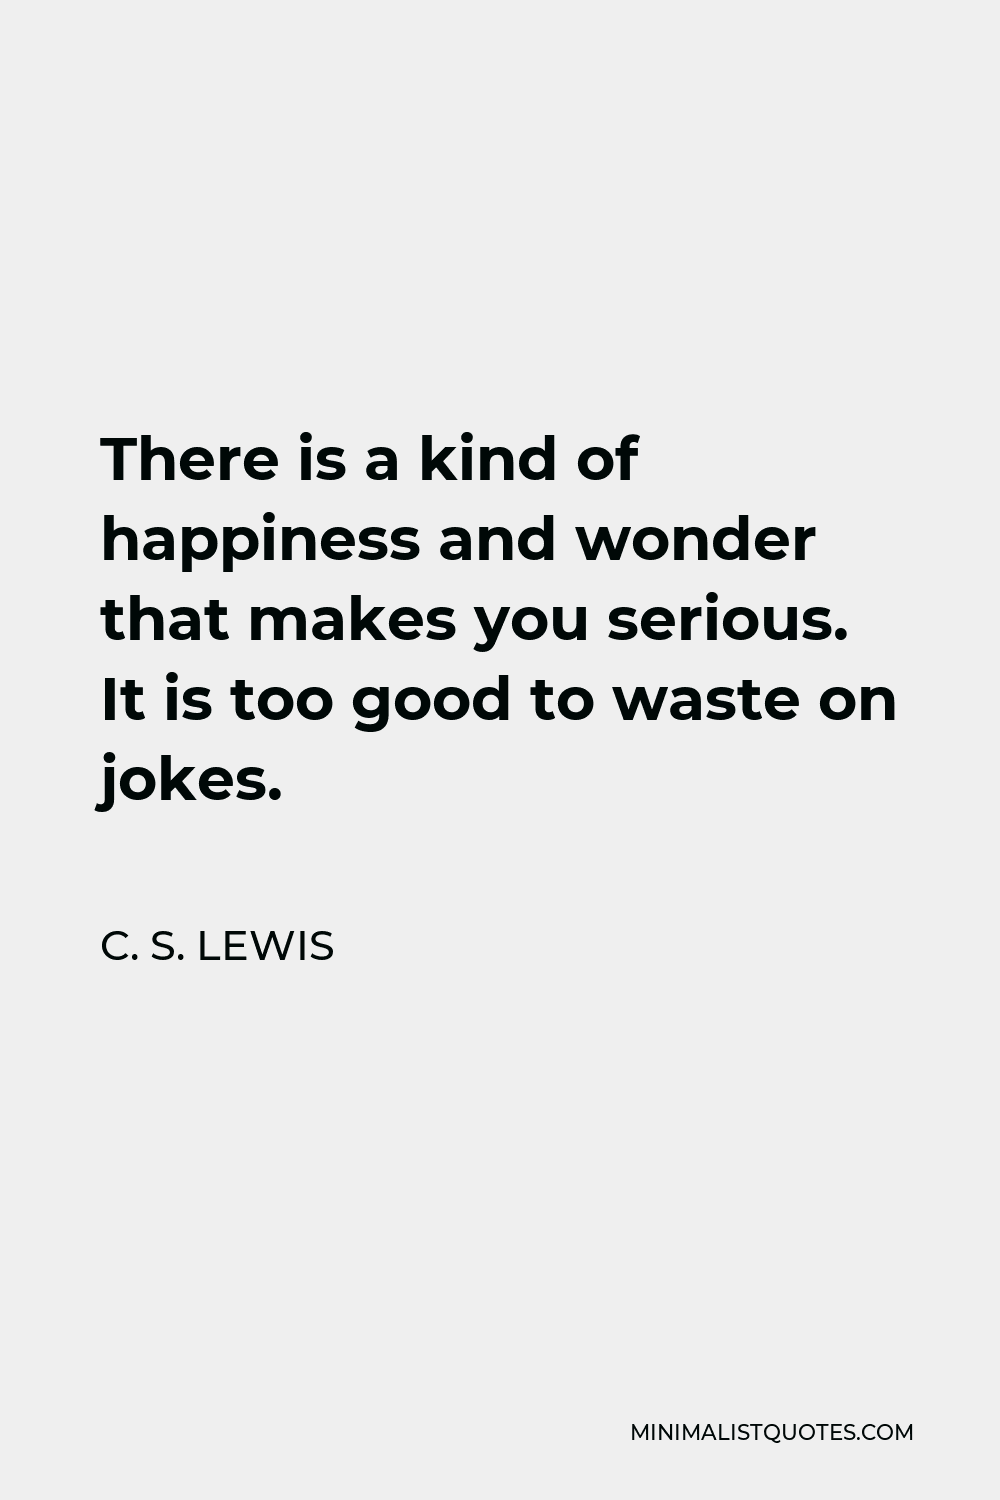 C. S. Lewis Quote - There is a kind of happiness and wonder that makes you serious. It is too good to waste on jokes.